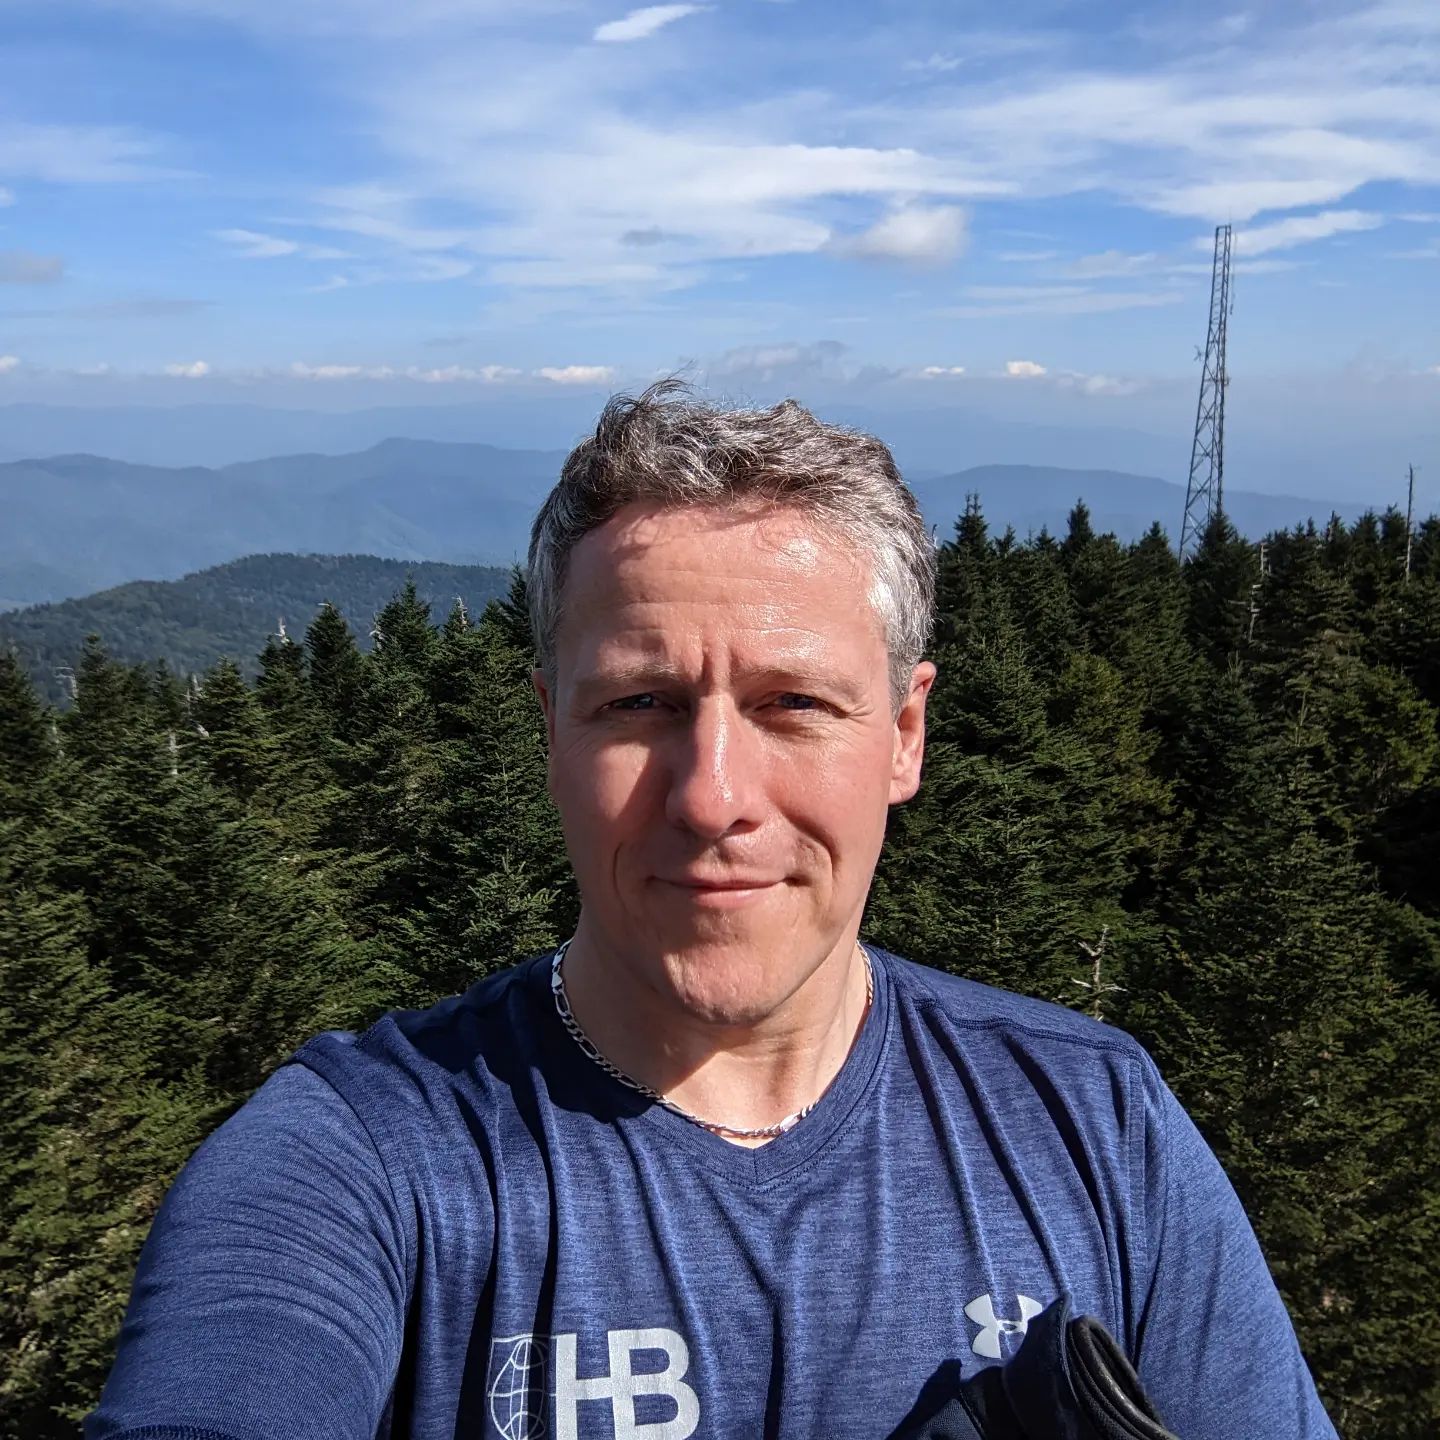 Ah there it is... Found the top of the world... I hiked half a mile and 300 feet of elevation change in motorcycle boots to get here too lol. Oh... Helmet hair... Don't care